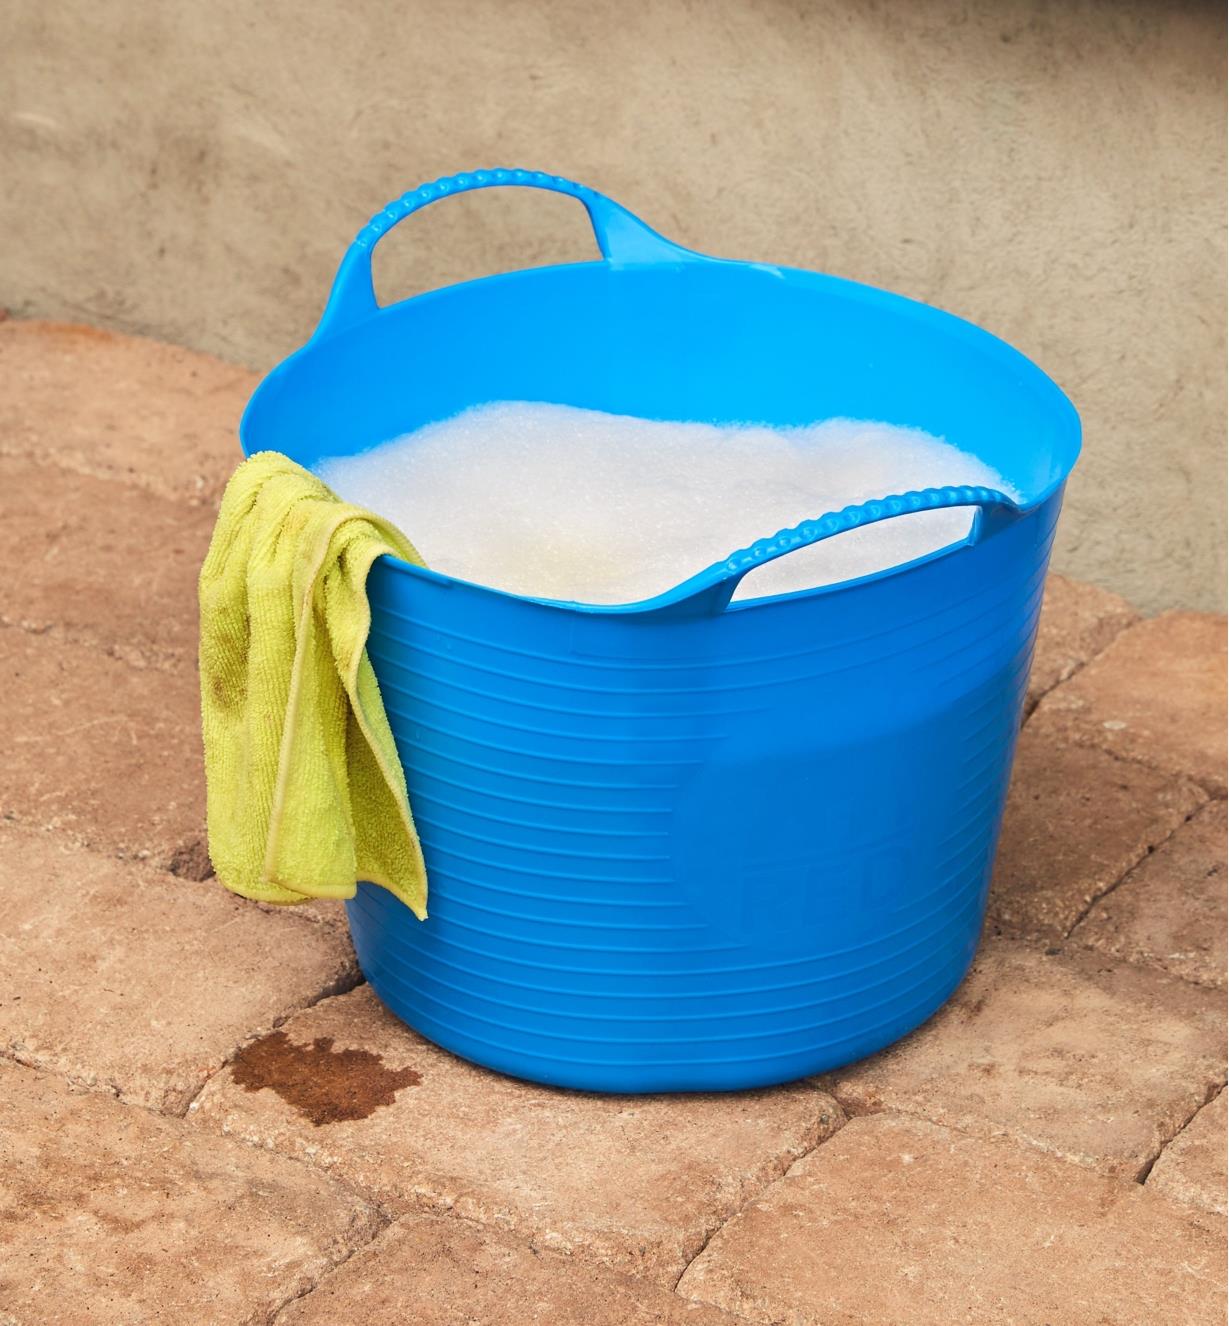 A 14 litre Tubtrug filled with soapy water, with a washcloth draped over the side